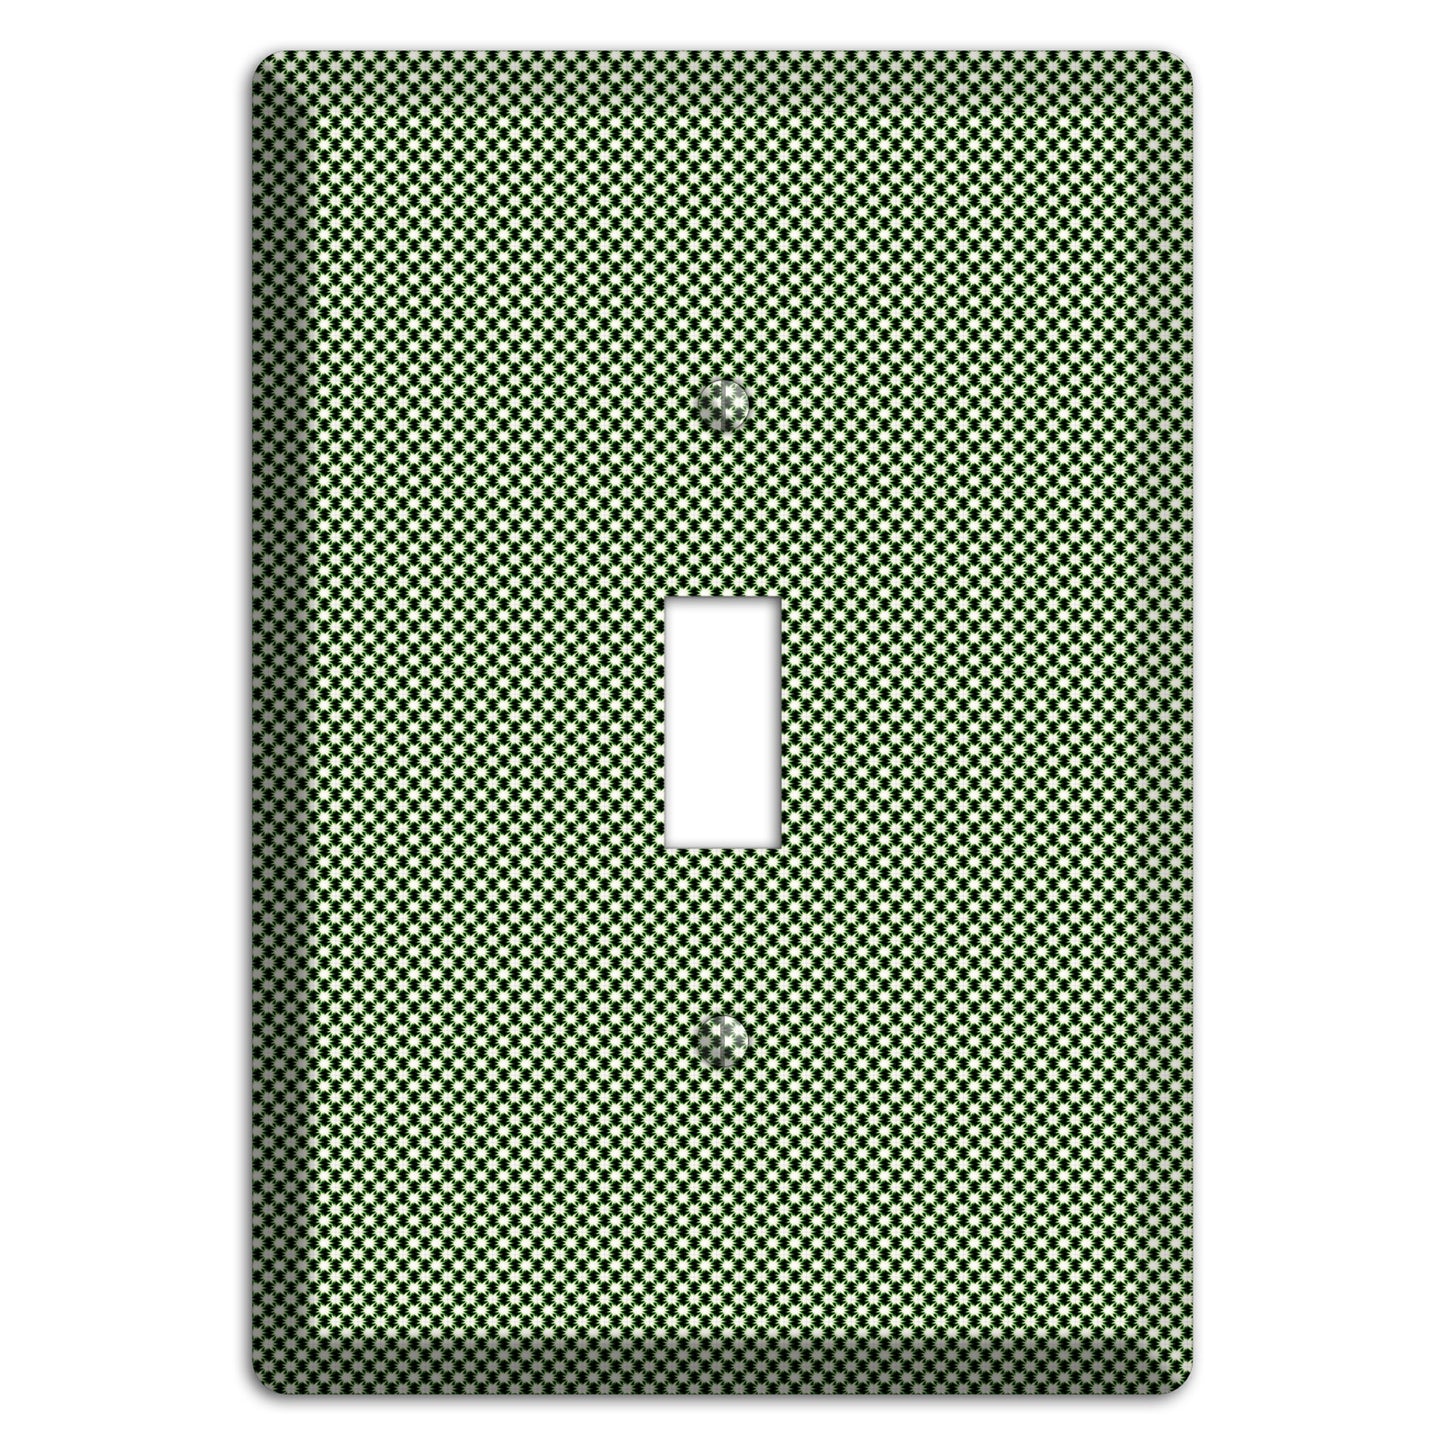 Green Tiny Check Cover Plates